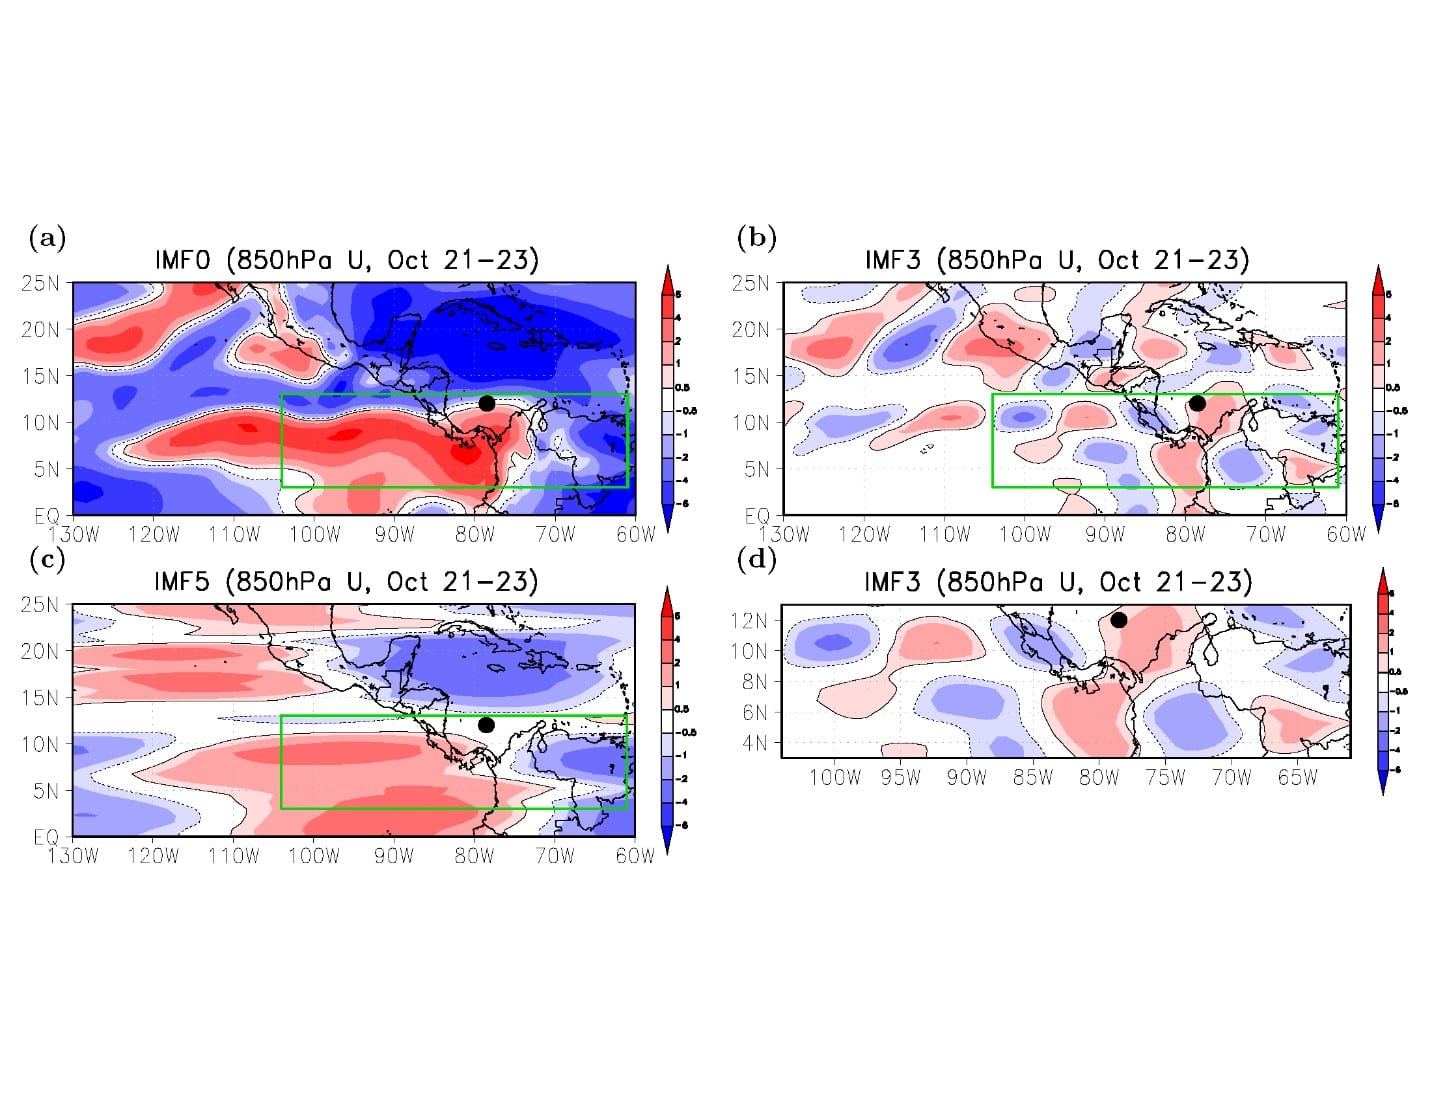 Figure 3: Decompositions of the low-level zonal winds from the ERA-Interim reanalysis data. (a) 850-hPa zonal winds averaged over a two-day period of 00Z October 21-23, 2012 (reproduced from Shen et al., 2013b). (b, c) The third and fifth IMFs extracted from the zonal wind fields, respectively. (d) A zoomed-in view of IMF3 in a green box. The black dot at 12oN, 78.5oW indicates the vortex center of the two-day averaged 850-hPa winds. Note that a wave-like component is shown in (b) and (d), while a west wind belt is displayed at low latitudes shaded in red in (c). These two components appear to have some similarities to those in Figure 2a and 2b, respectively. Image Credit: Bo-Wen Shen.